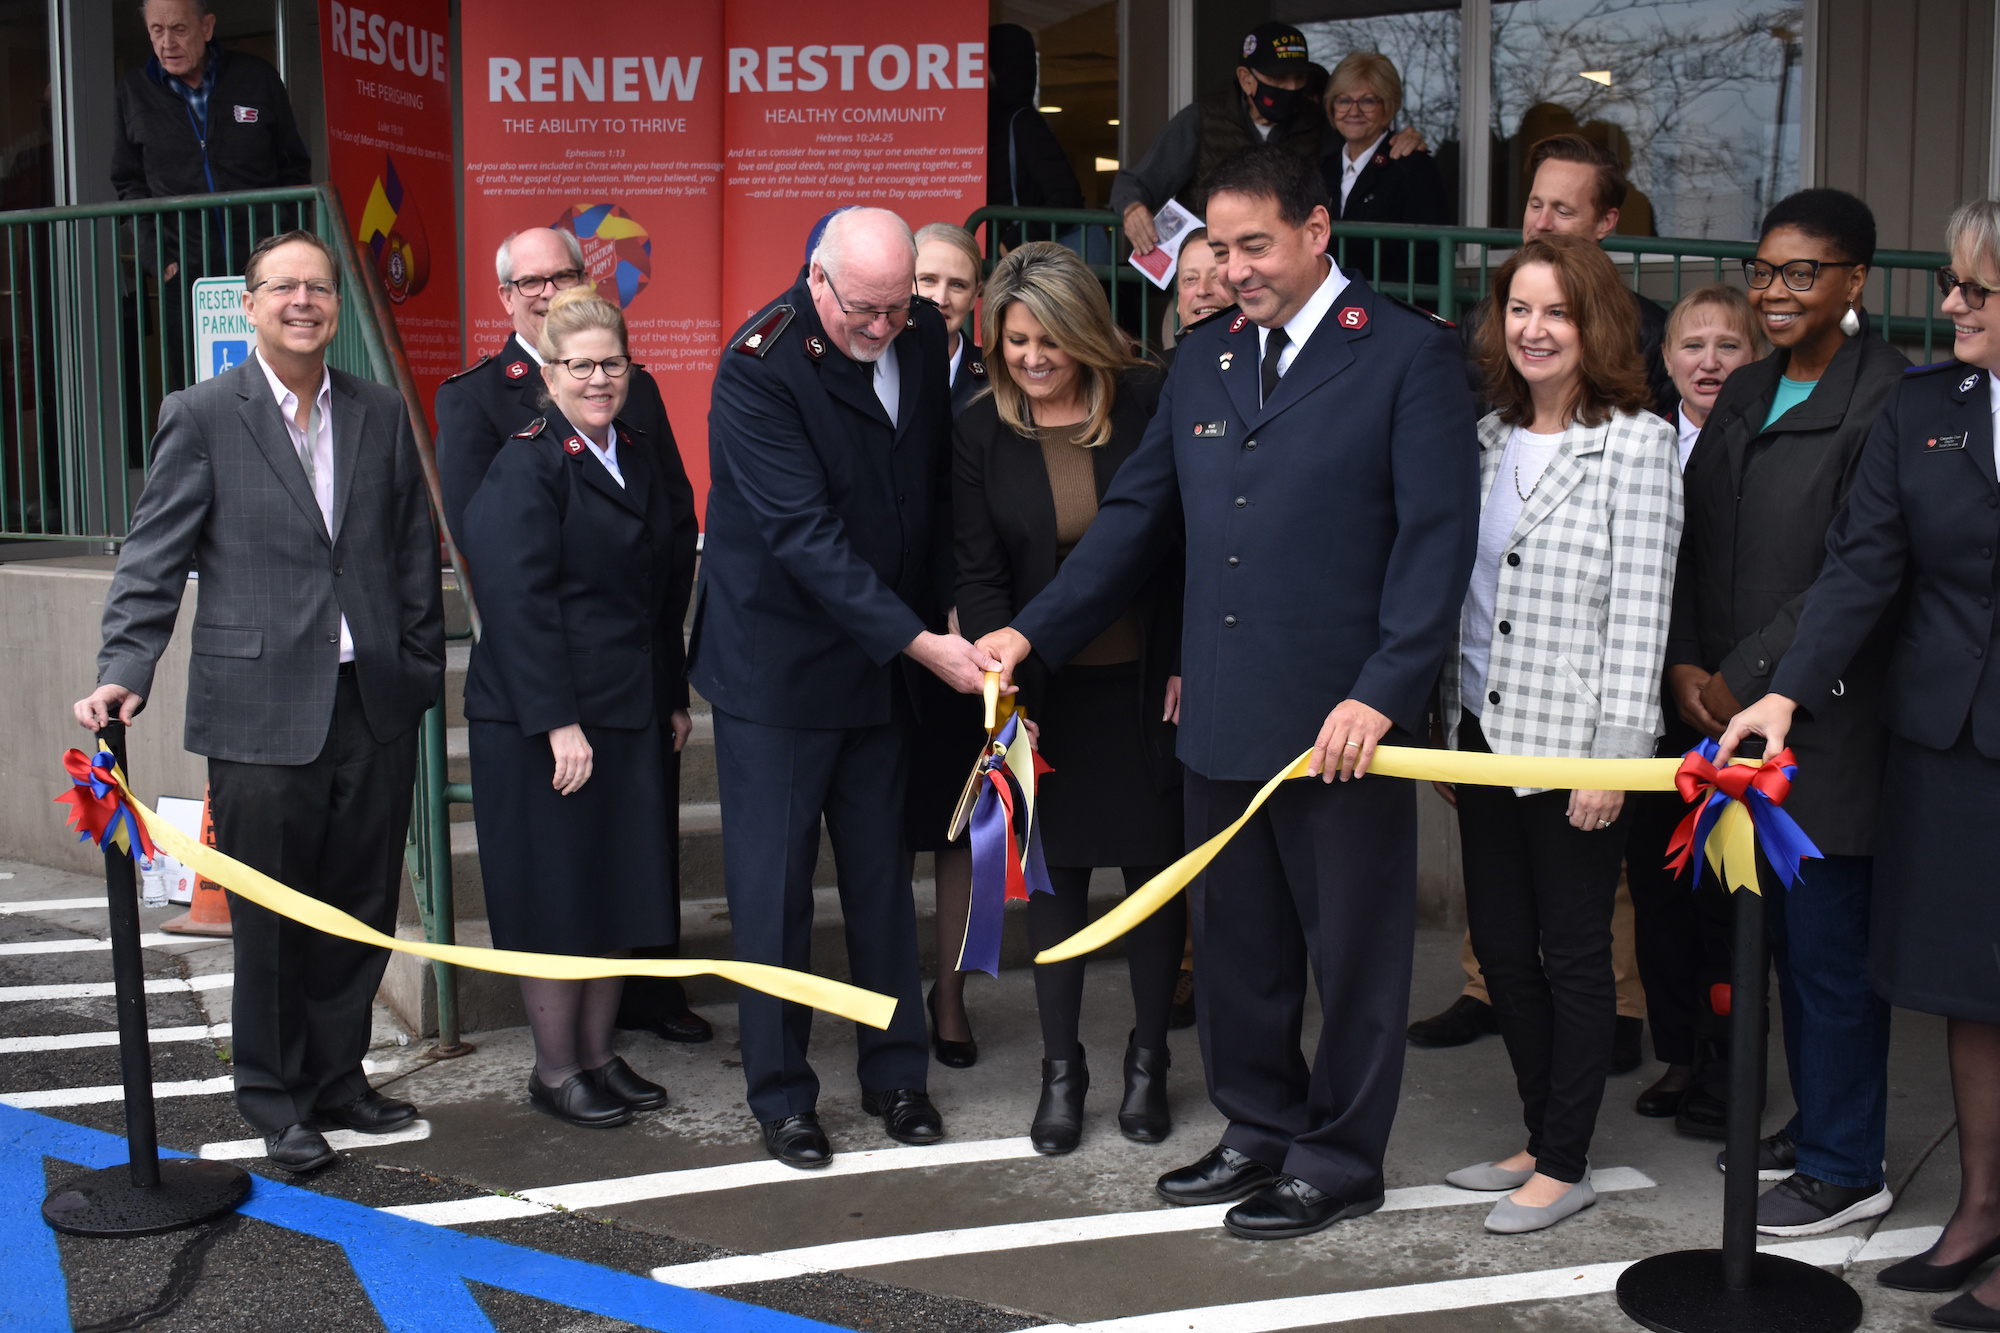 men and women participate in a ribbon cutting ceremony